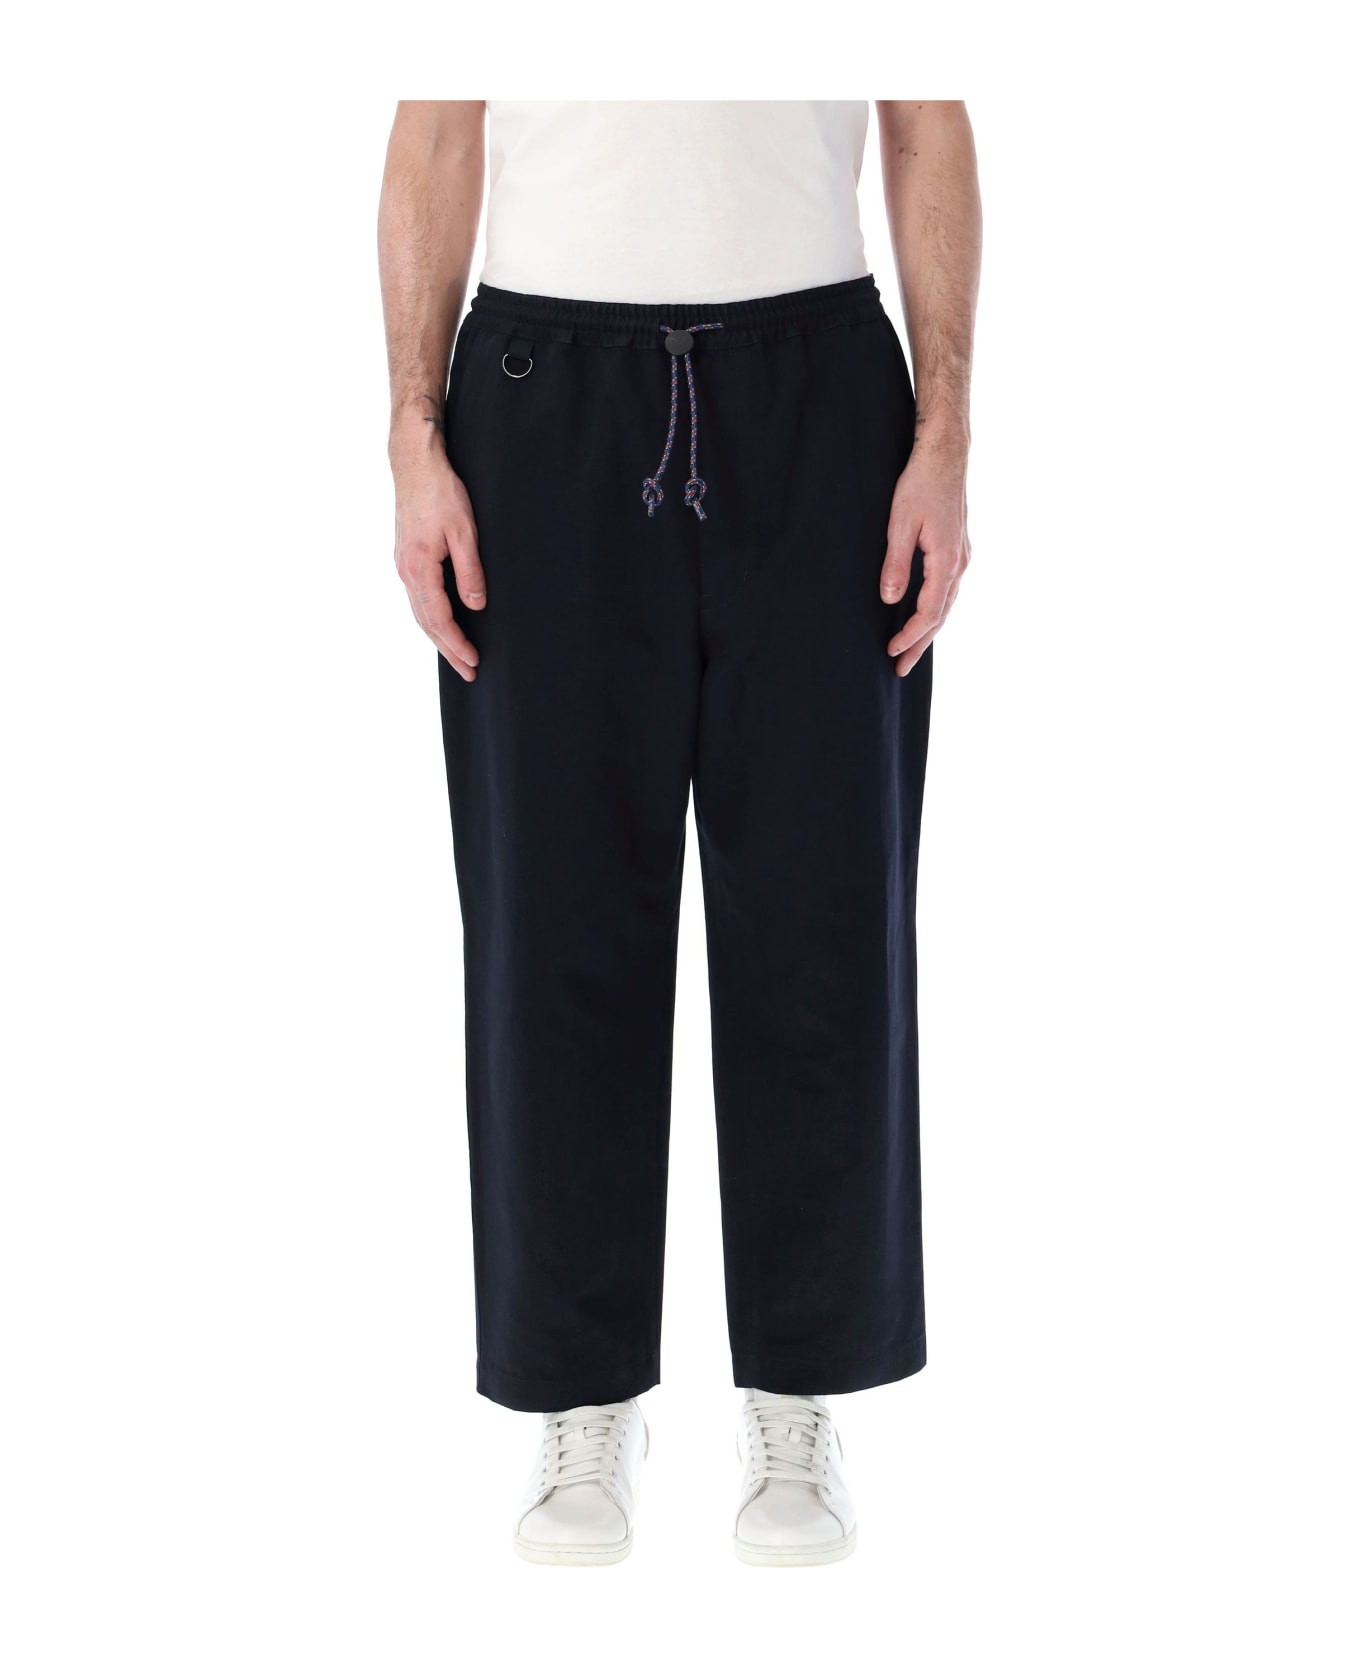 Comme des Garçons Homme Elastic Waistband Chino Pants - NAVY ボトムス